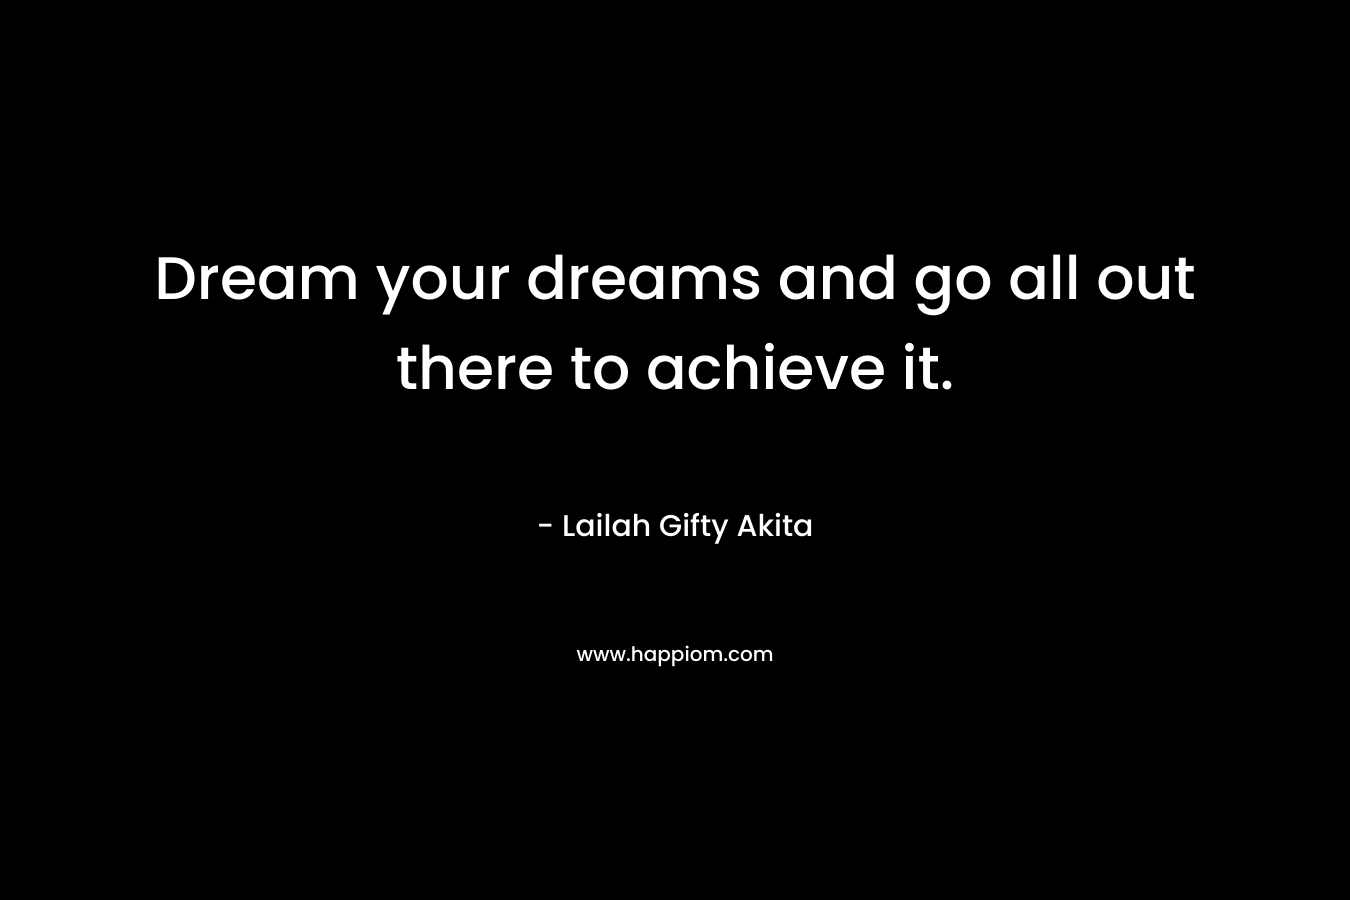 Dream your dreams and go all out there to achieve it.